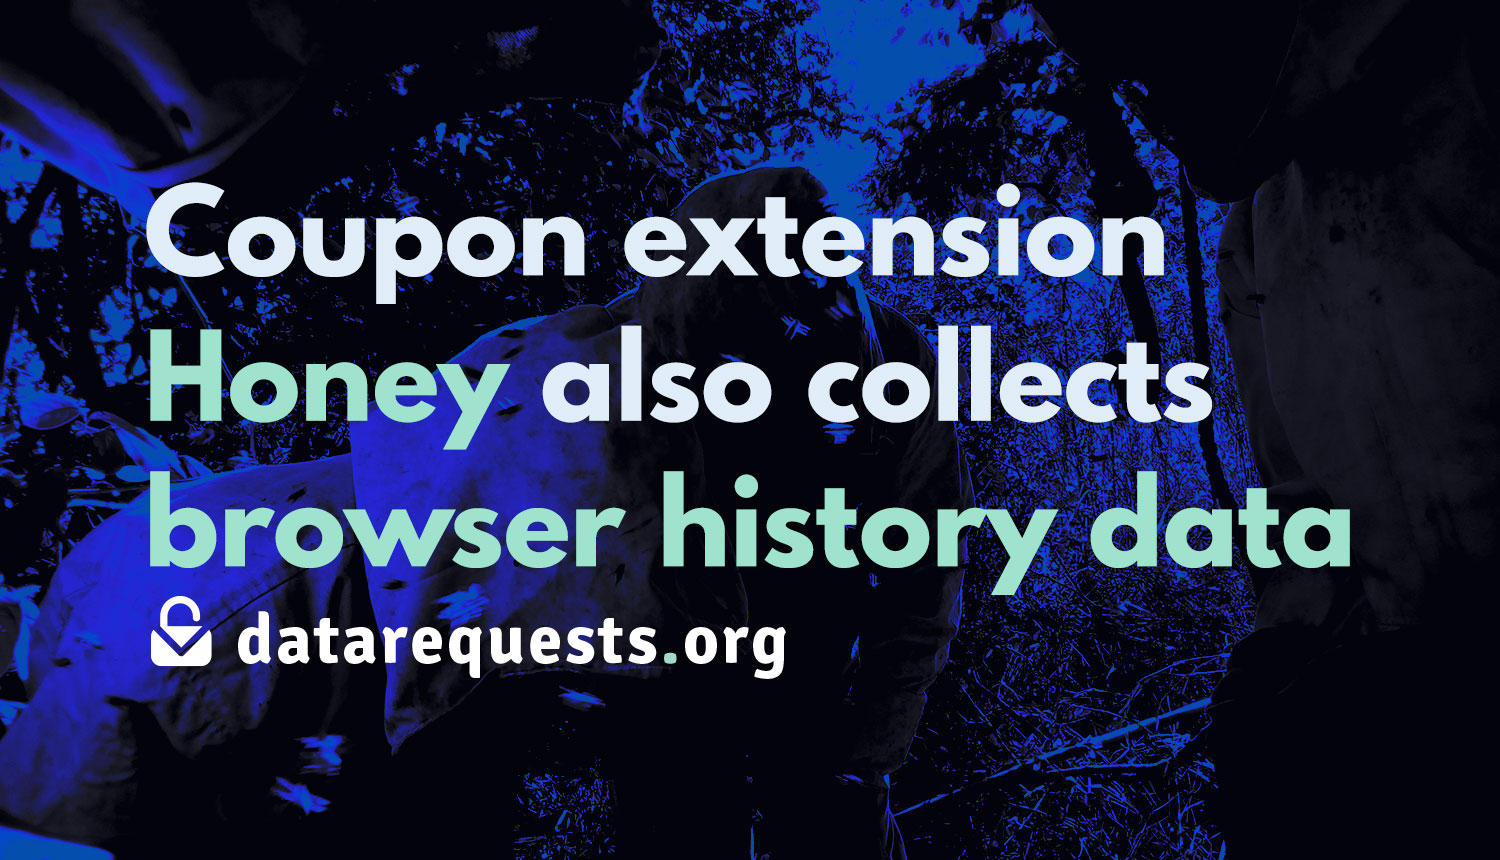 More than just coupon codes: Browser extension Honey also collects their user’s history data